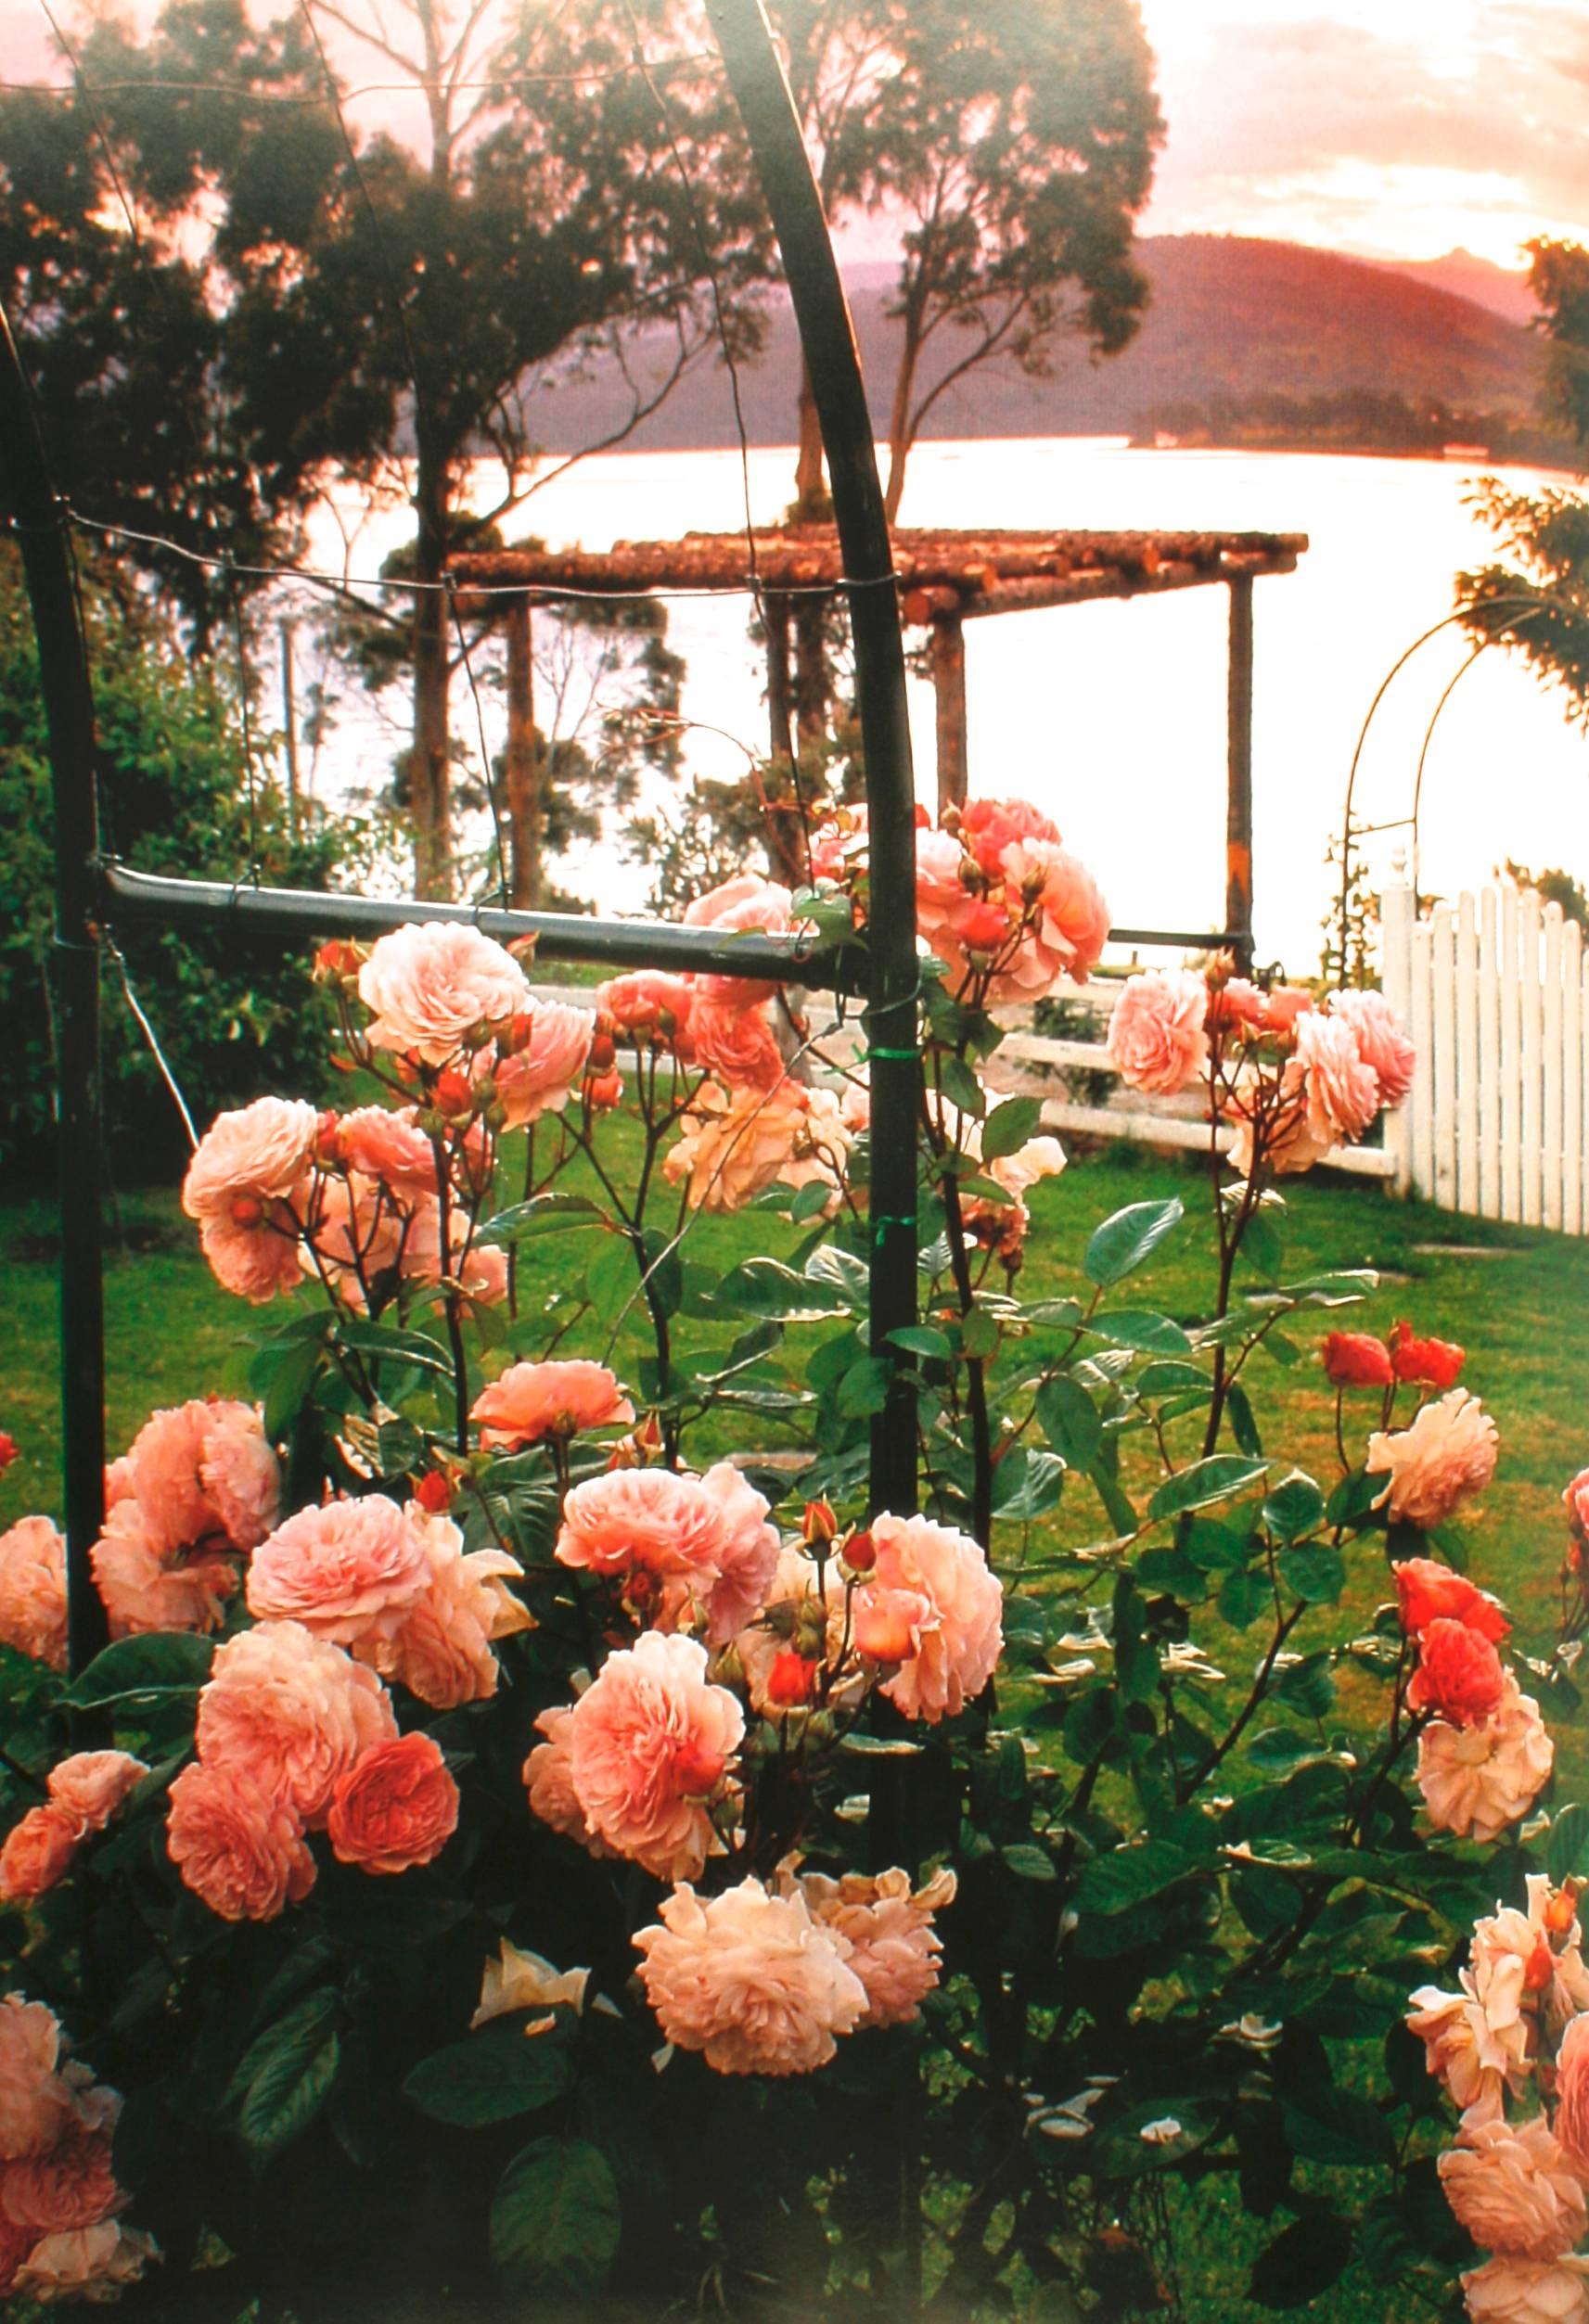 Botanica's Roses, The Encyclopedia of Roses 2